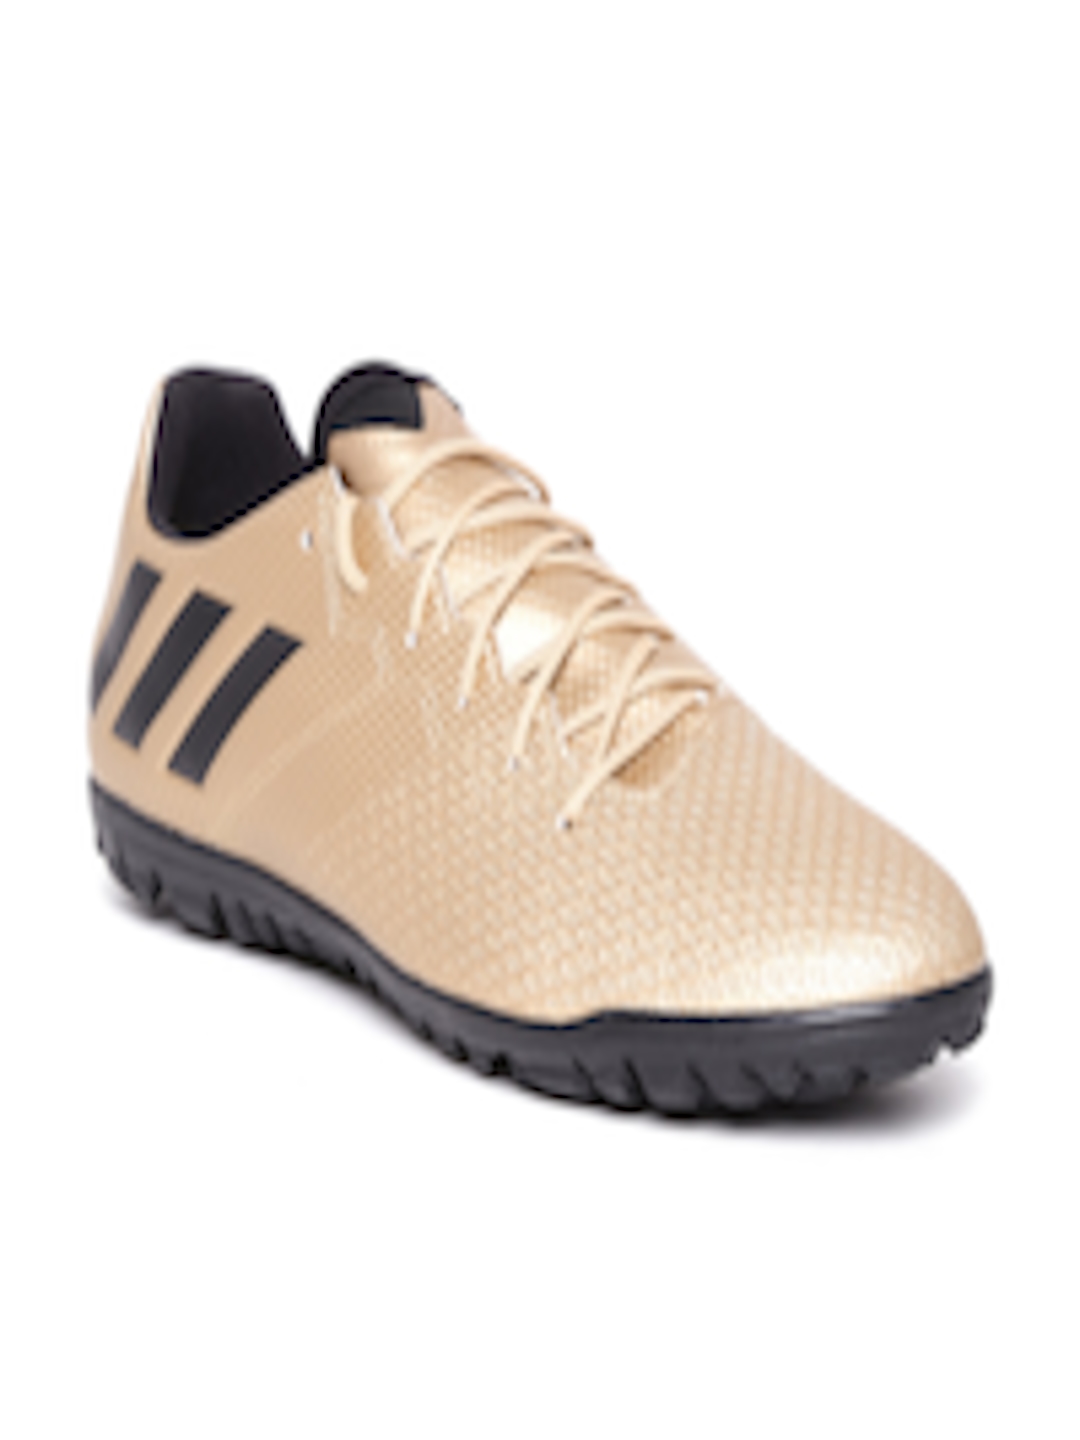 Buy ADIDAS Men Gold Toned Textured Messi 16.3 TF Football Shoes ...